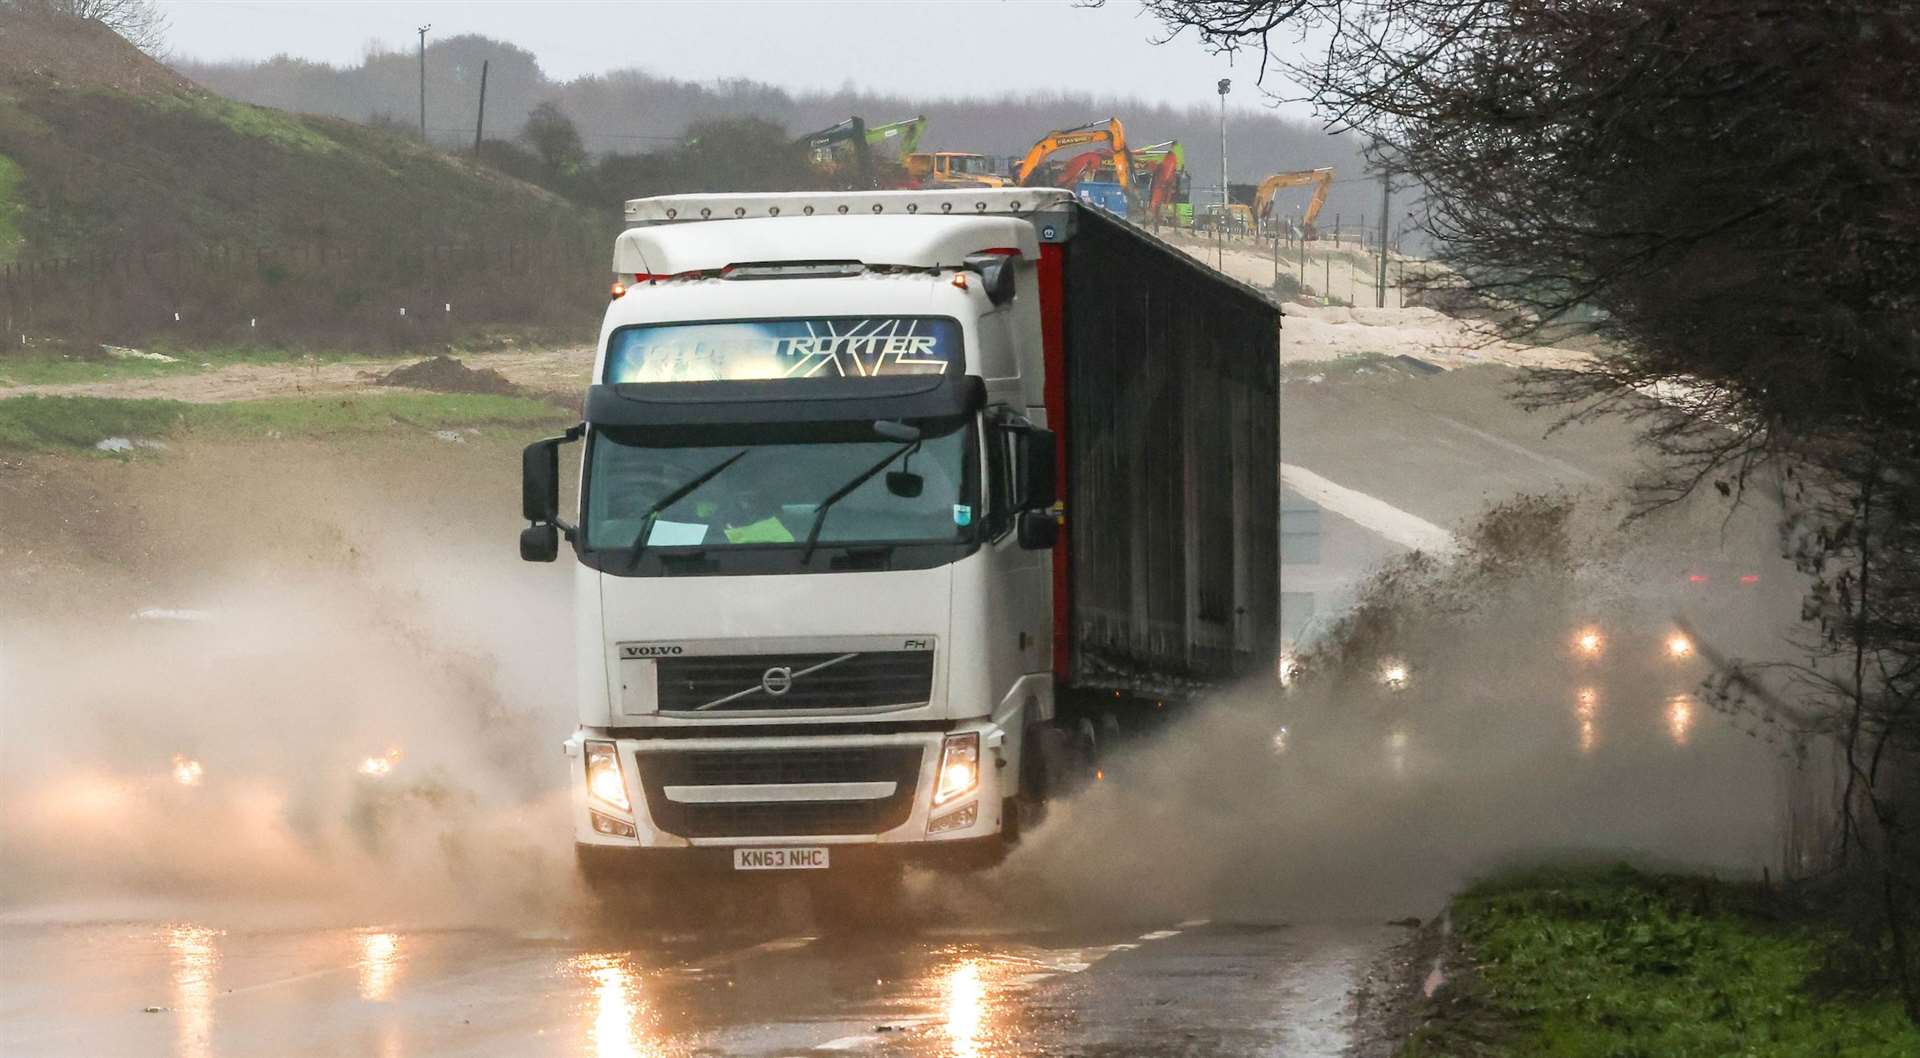 Motorists on the the water-logged A249 at Stockbury near Sittingbourne have been warned about “treacherous” driving conditions as people embark on a Christmas getaway. Picture: UKNIP